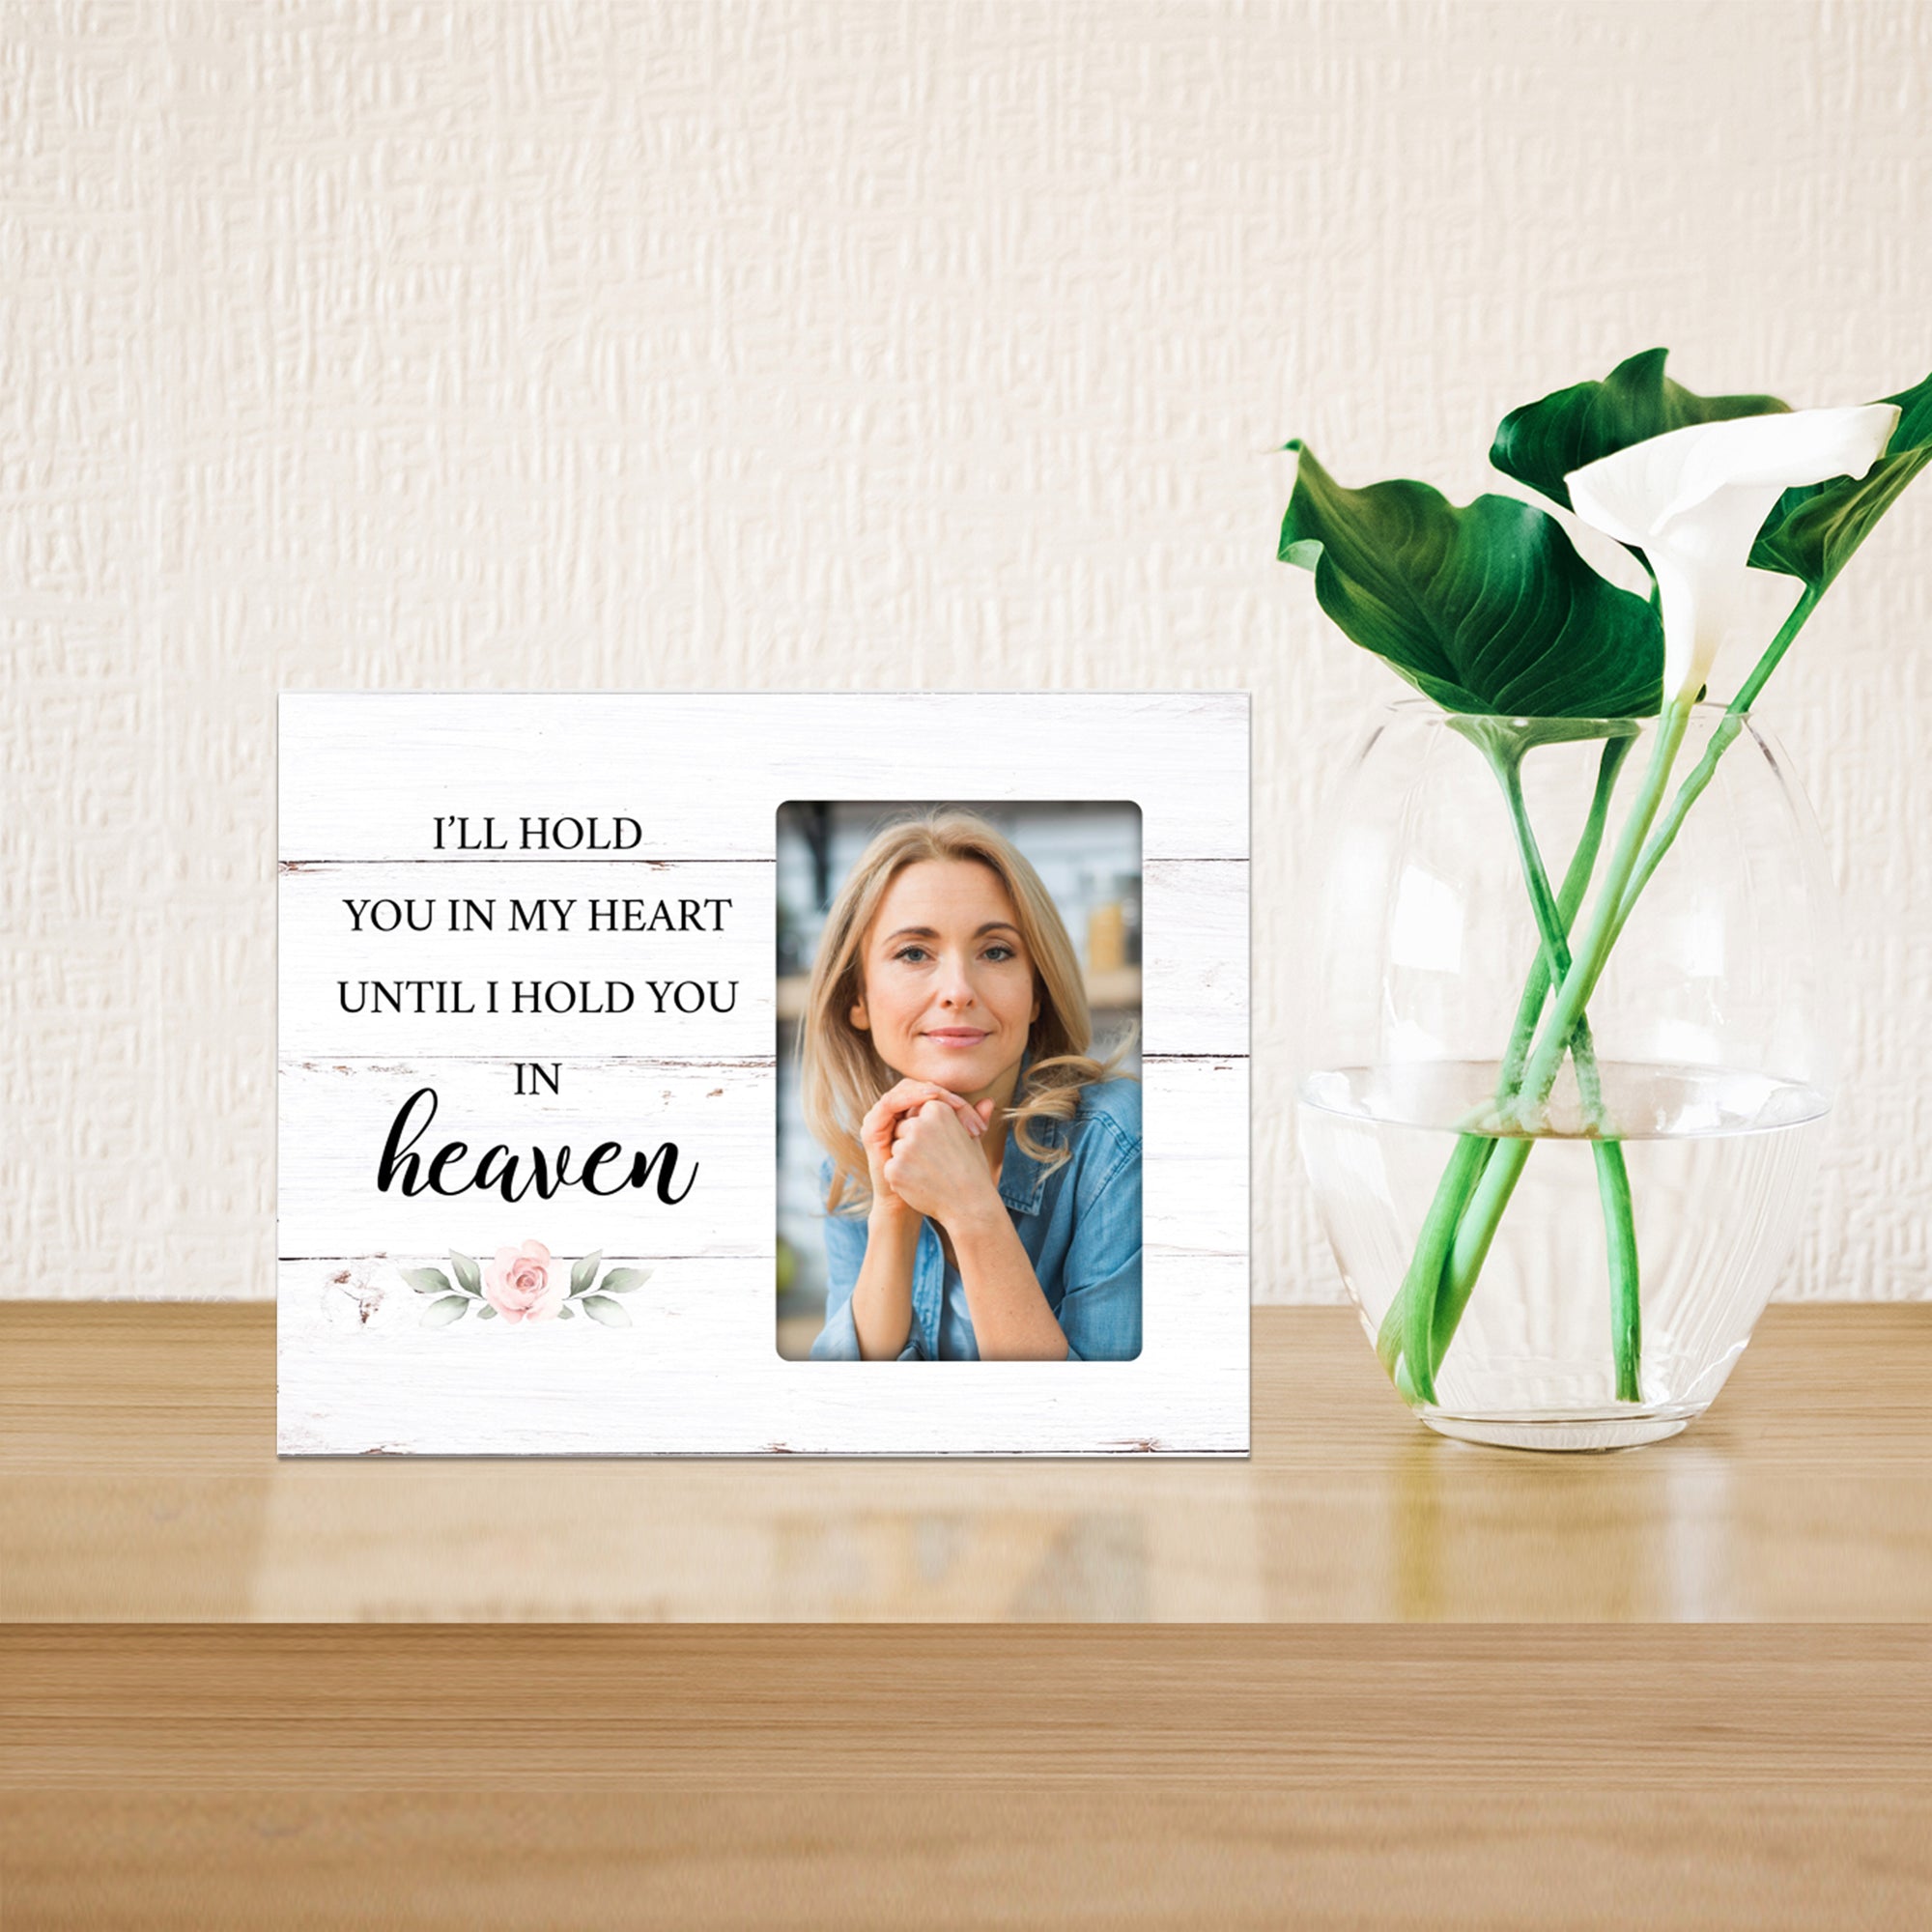 Rustic-Inspired Wooden Human Memorial Frames That Holds A 4x6in Photo - I'll Hold you In My